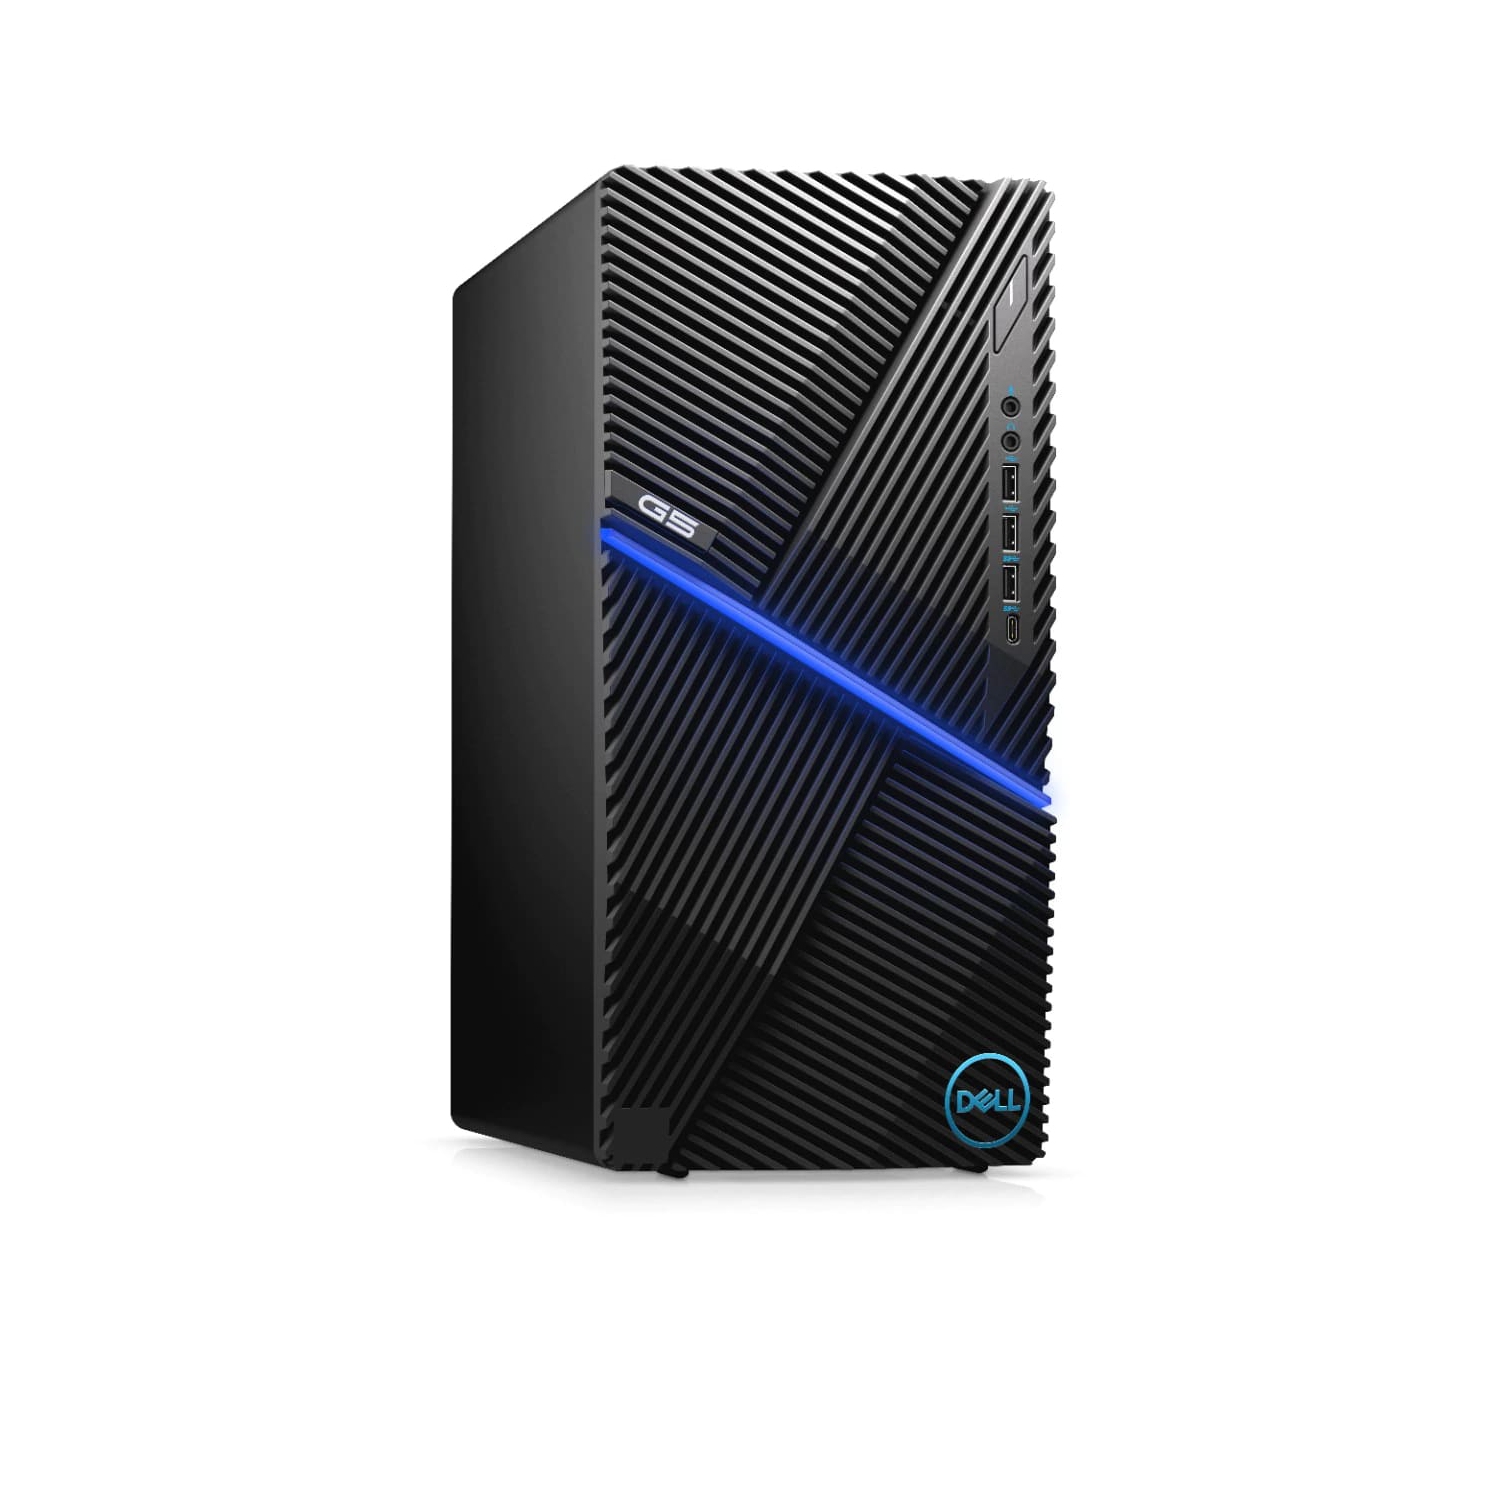 Refurbished (Excellent) - Dell G5 5000 Gaming Desktop (2020), Core i7, 2TB HDD + 512GB SSD, 16GB RAM, 2060 SUPER, 8 Cores @ 5.1 GHz, 10th Gen CPU Certified Refurbished